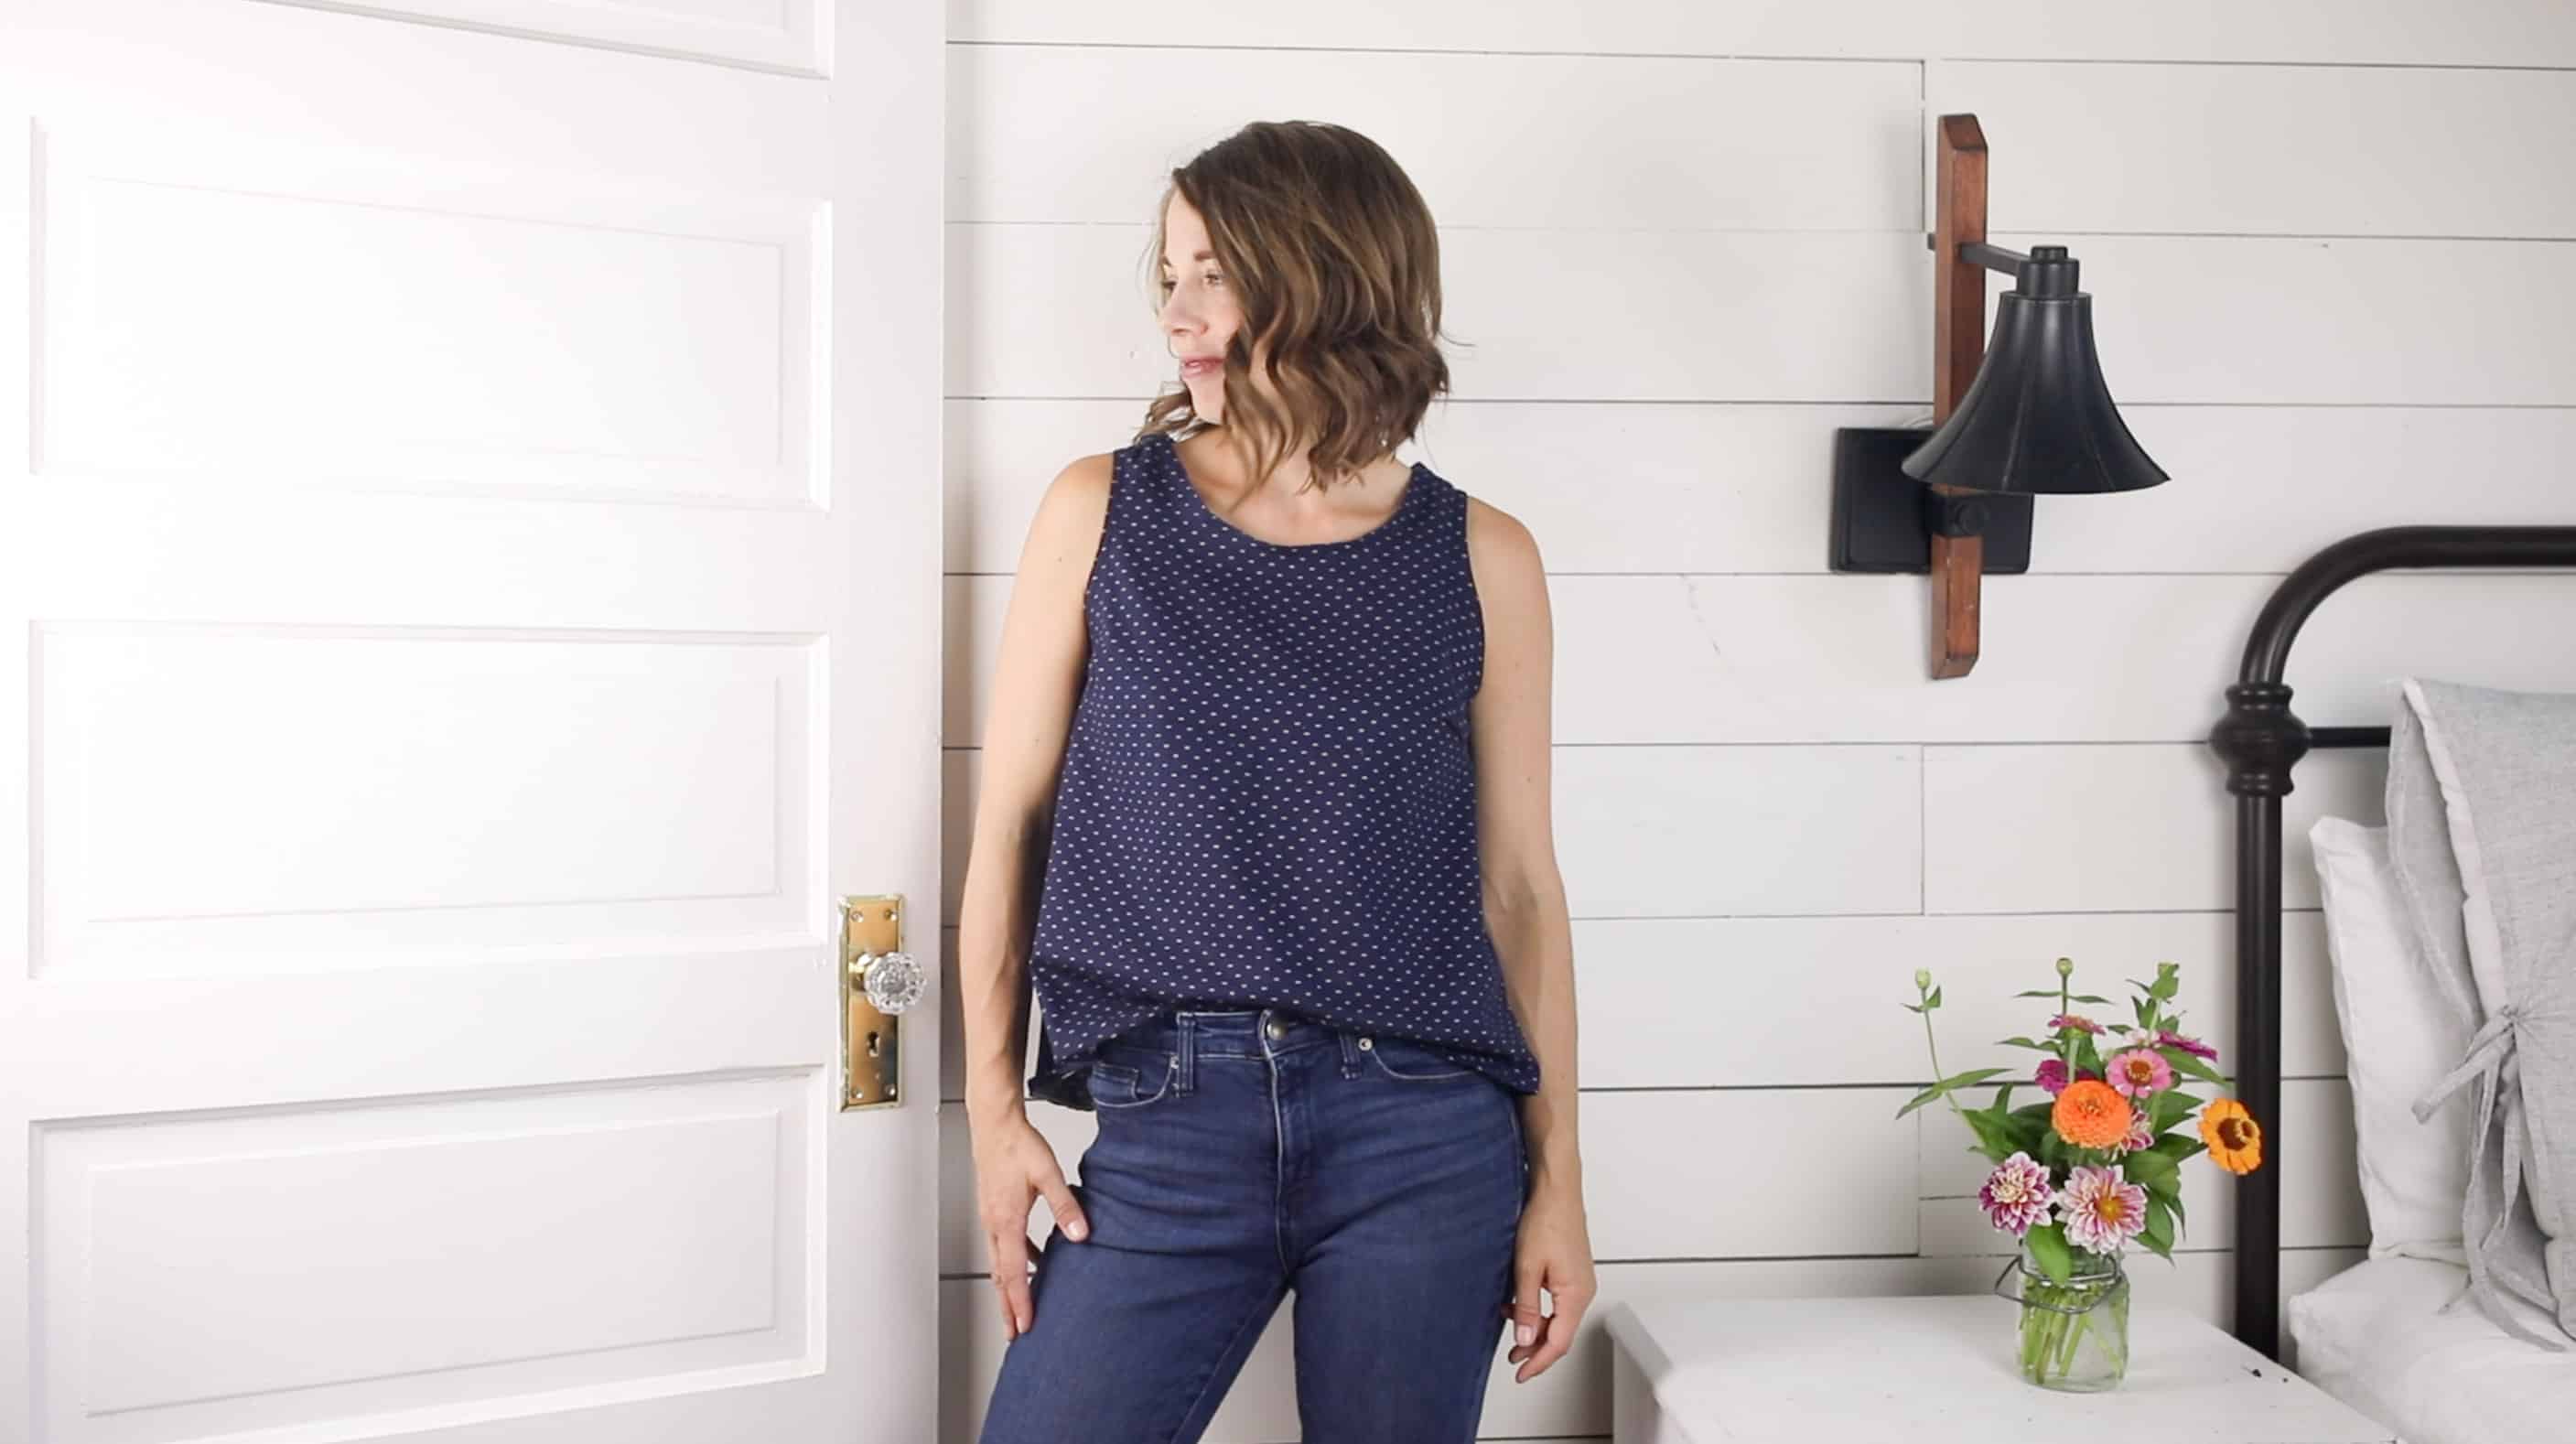 Phoebe Linen Tank with Free Sewing Pattern Episode: 1 Simple but